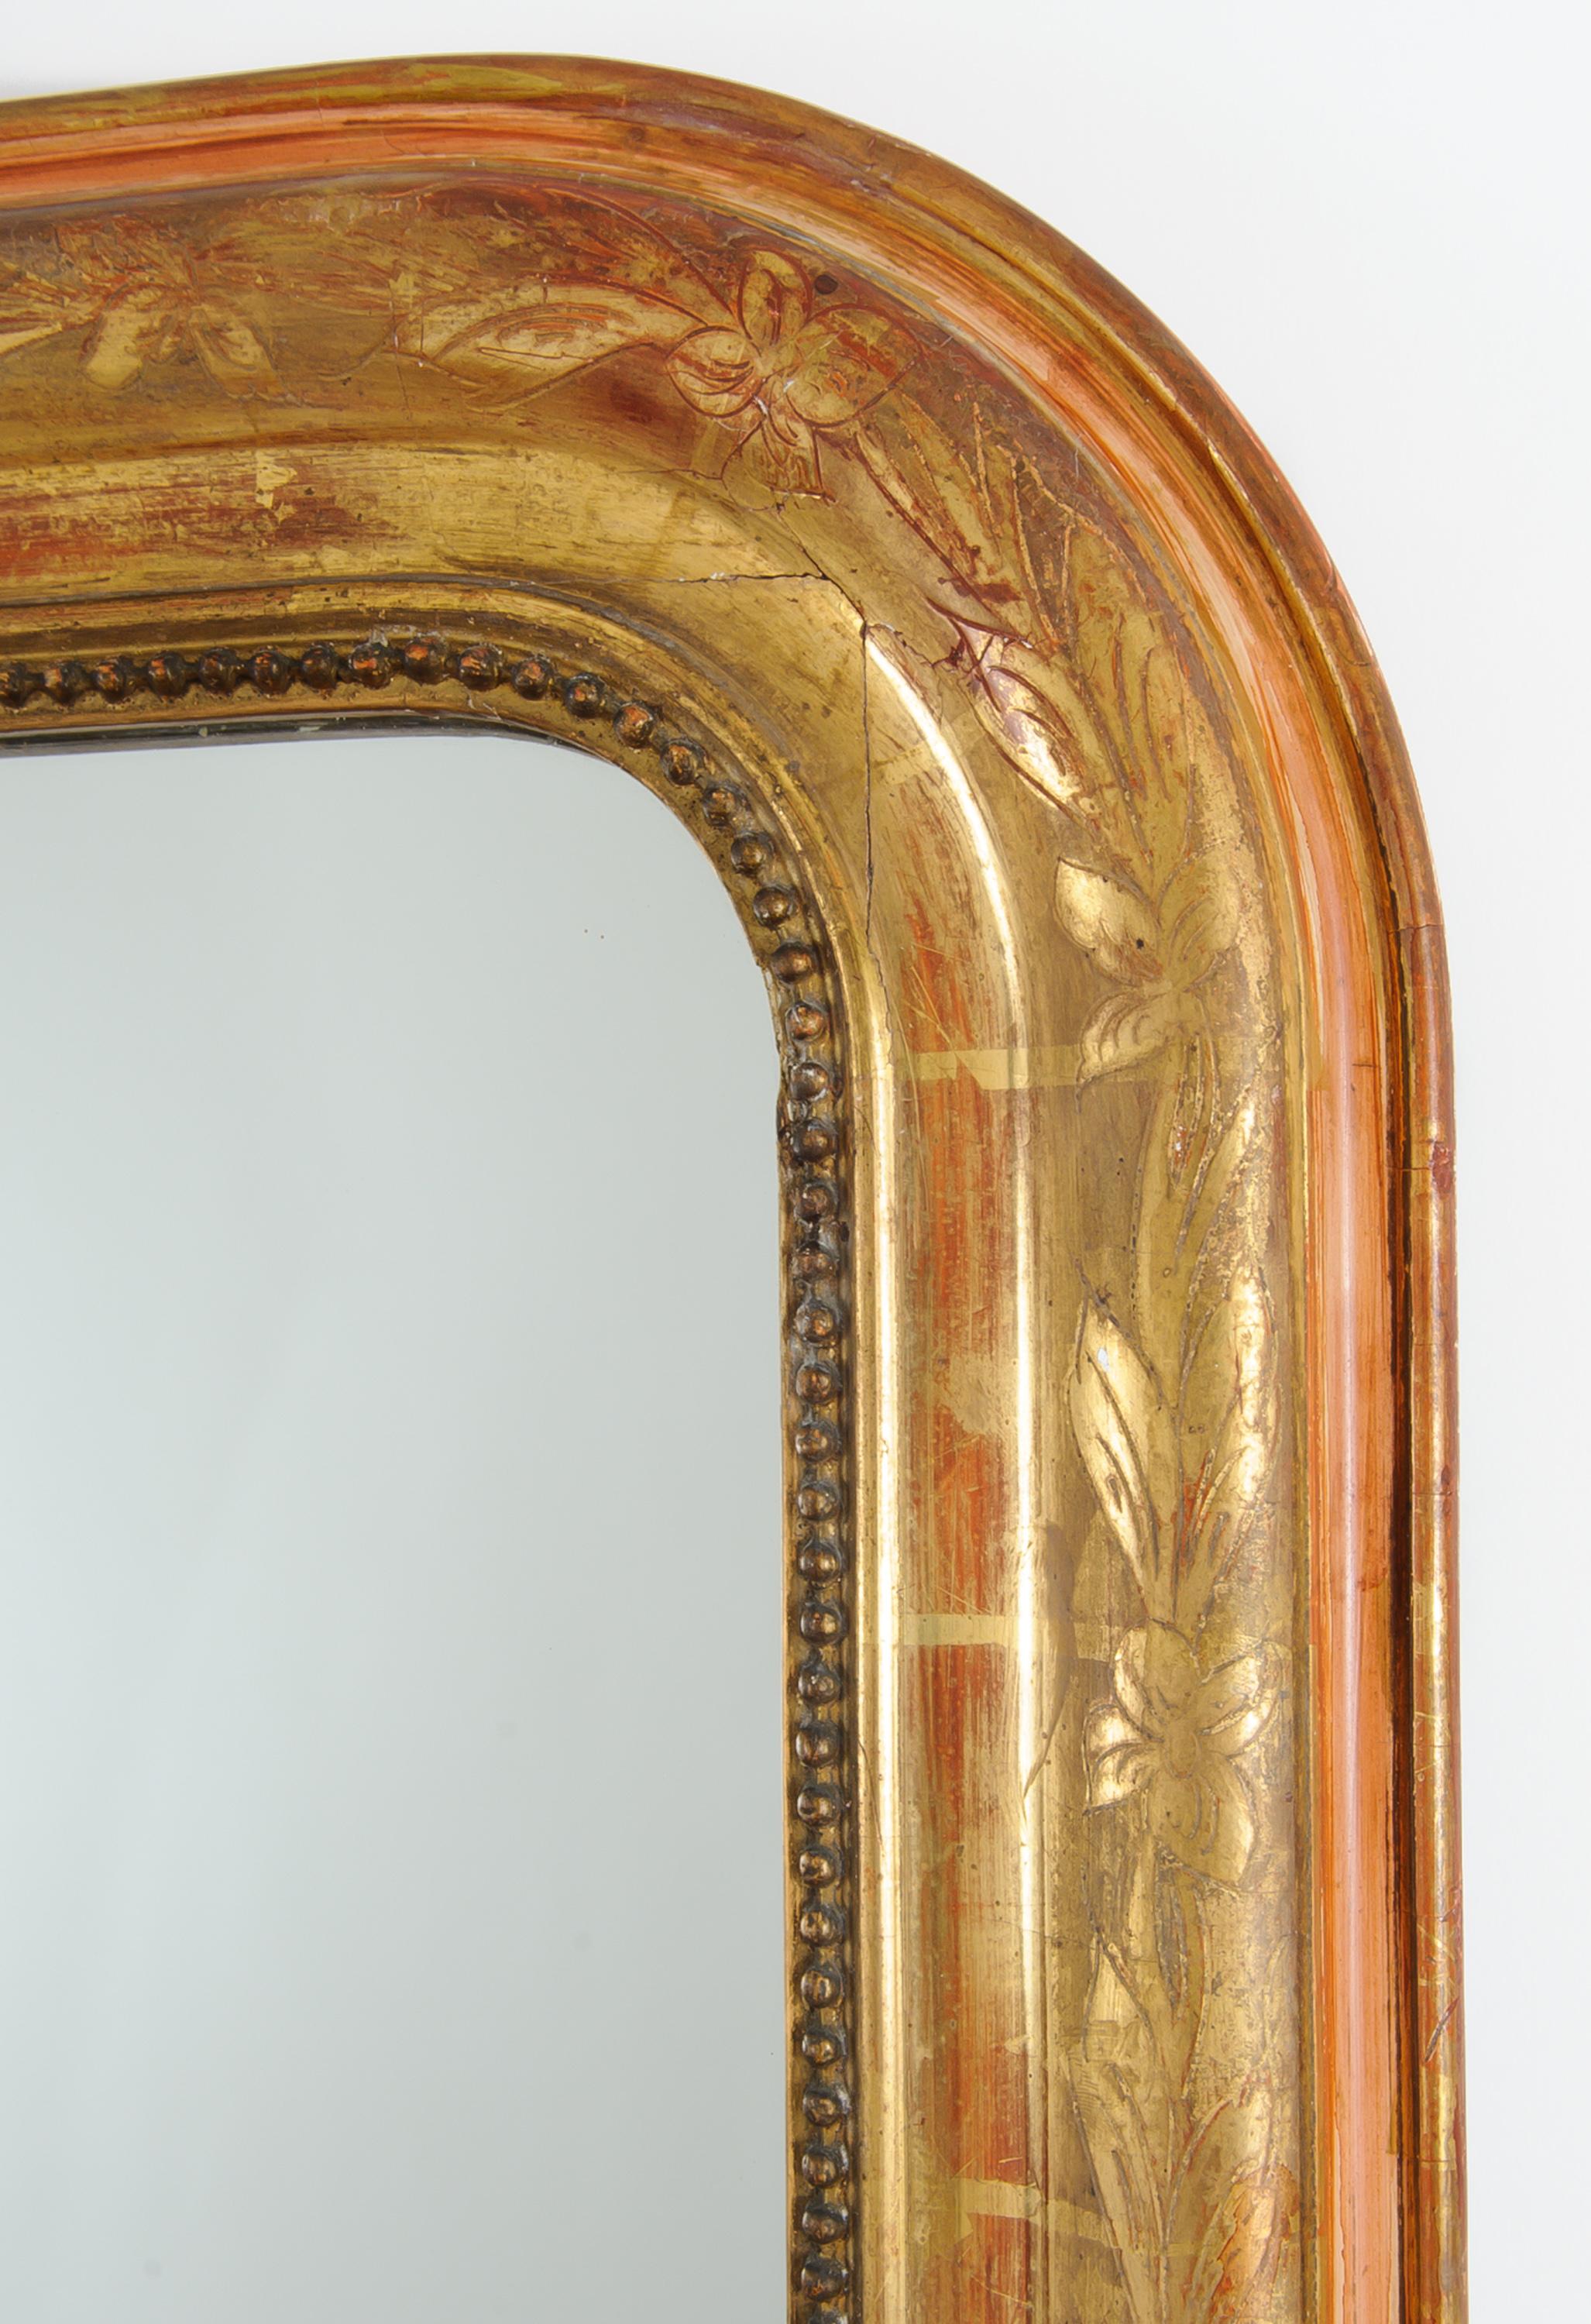 This period mirror has the original bright gold leaf finish with a floral motif on the full frame.  It has a finely carved bead detail surround. Red bole layer is apparent and adds a lovely complement to the gold leaf finish, which has a bright tone